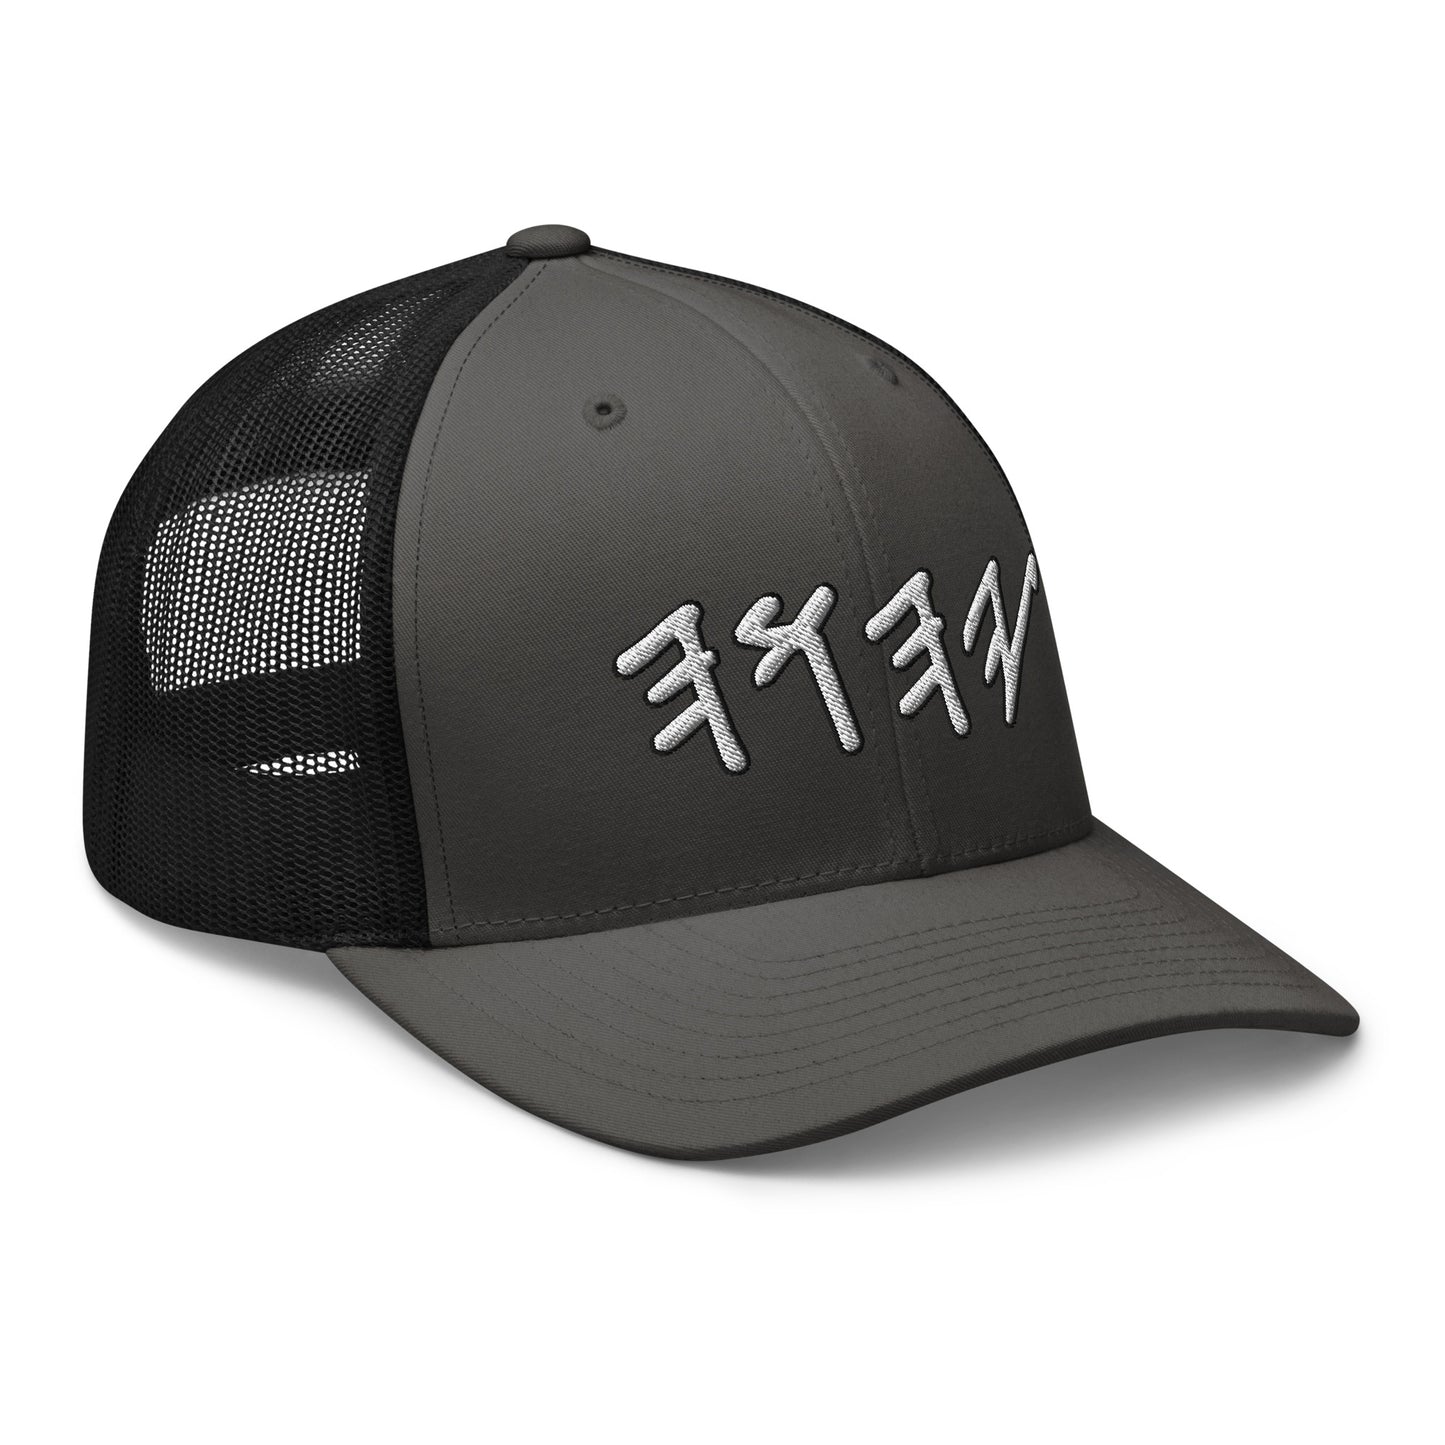 Yahuwah Hebrew Letters Embroidery Trucker Cap